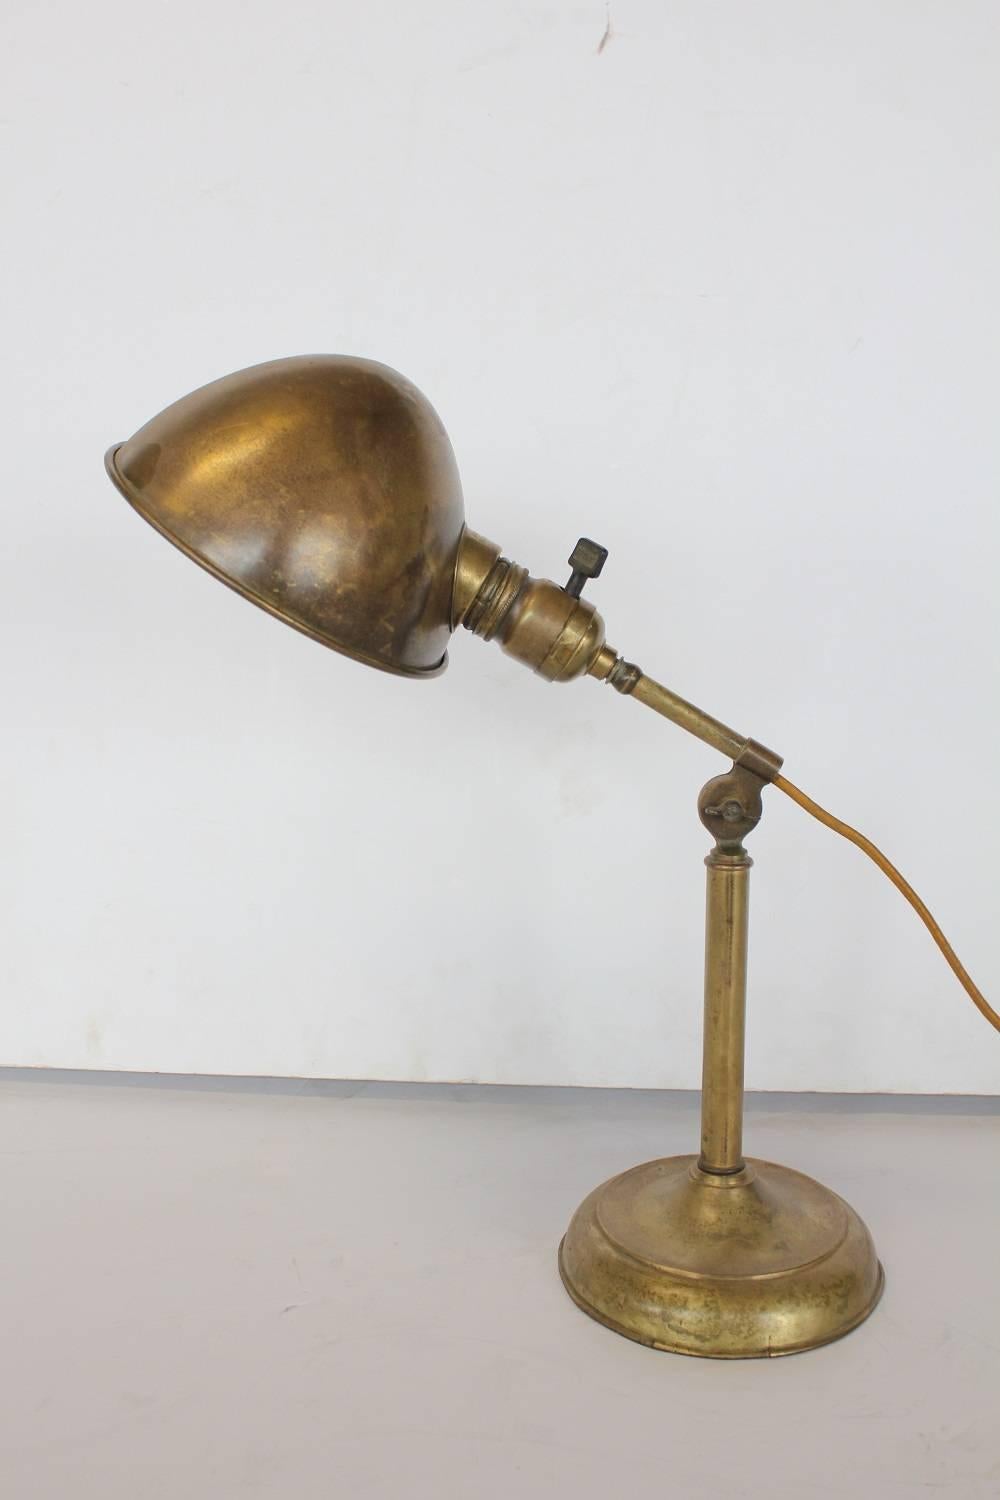 Antique library desk brass lamp. Rewired and in working condition. Measures: Height 18